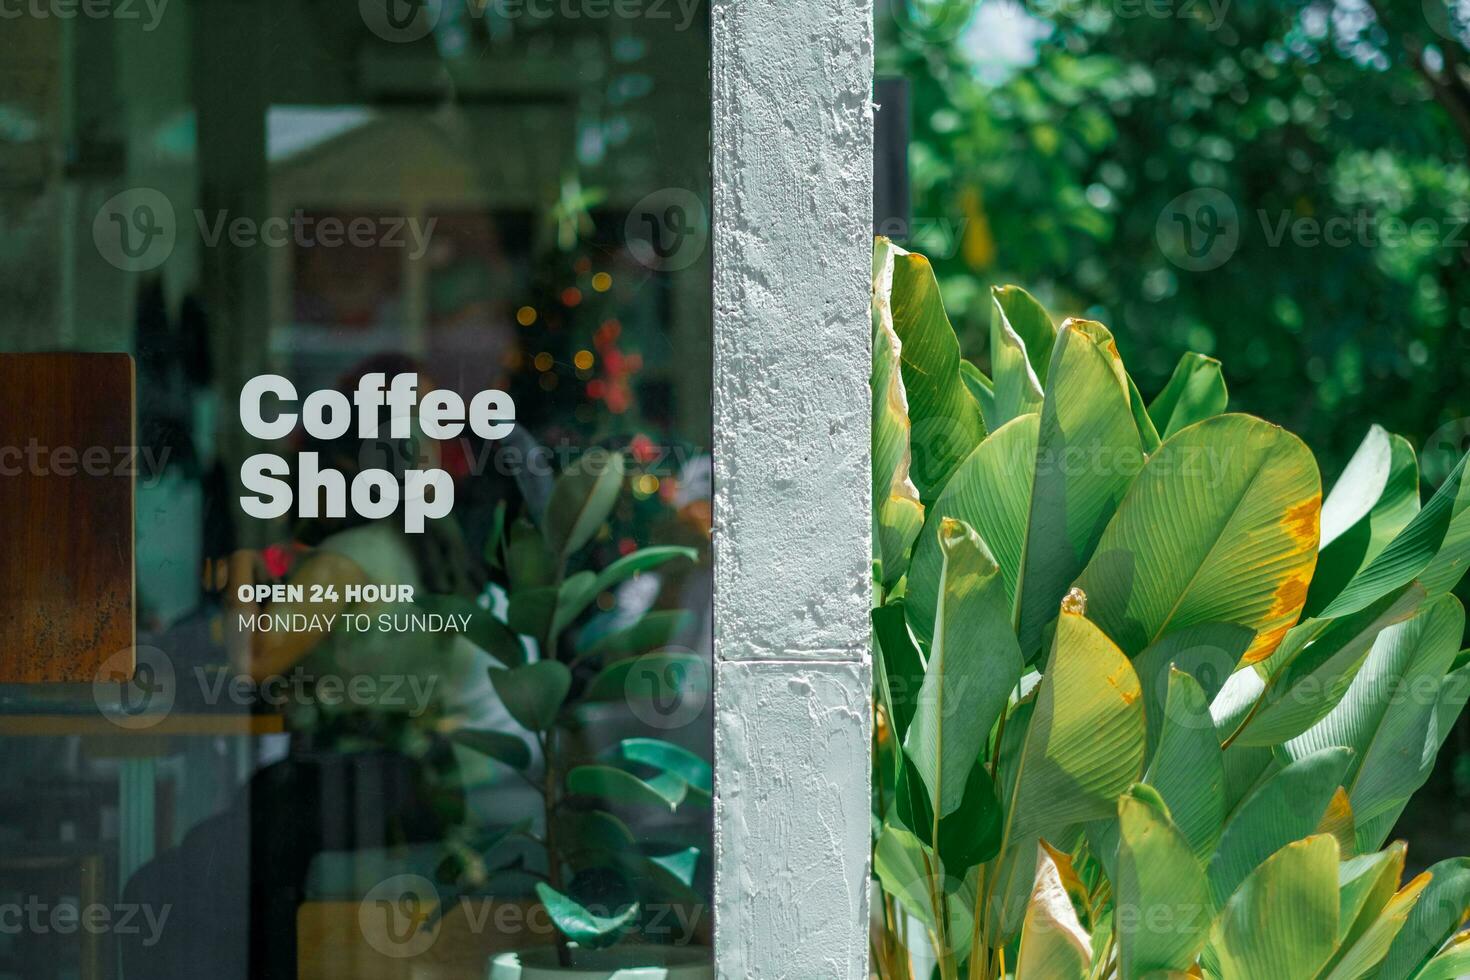 An exterior view of a coffee shop featuring a sign on the glass door photo